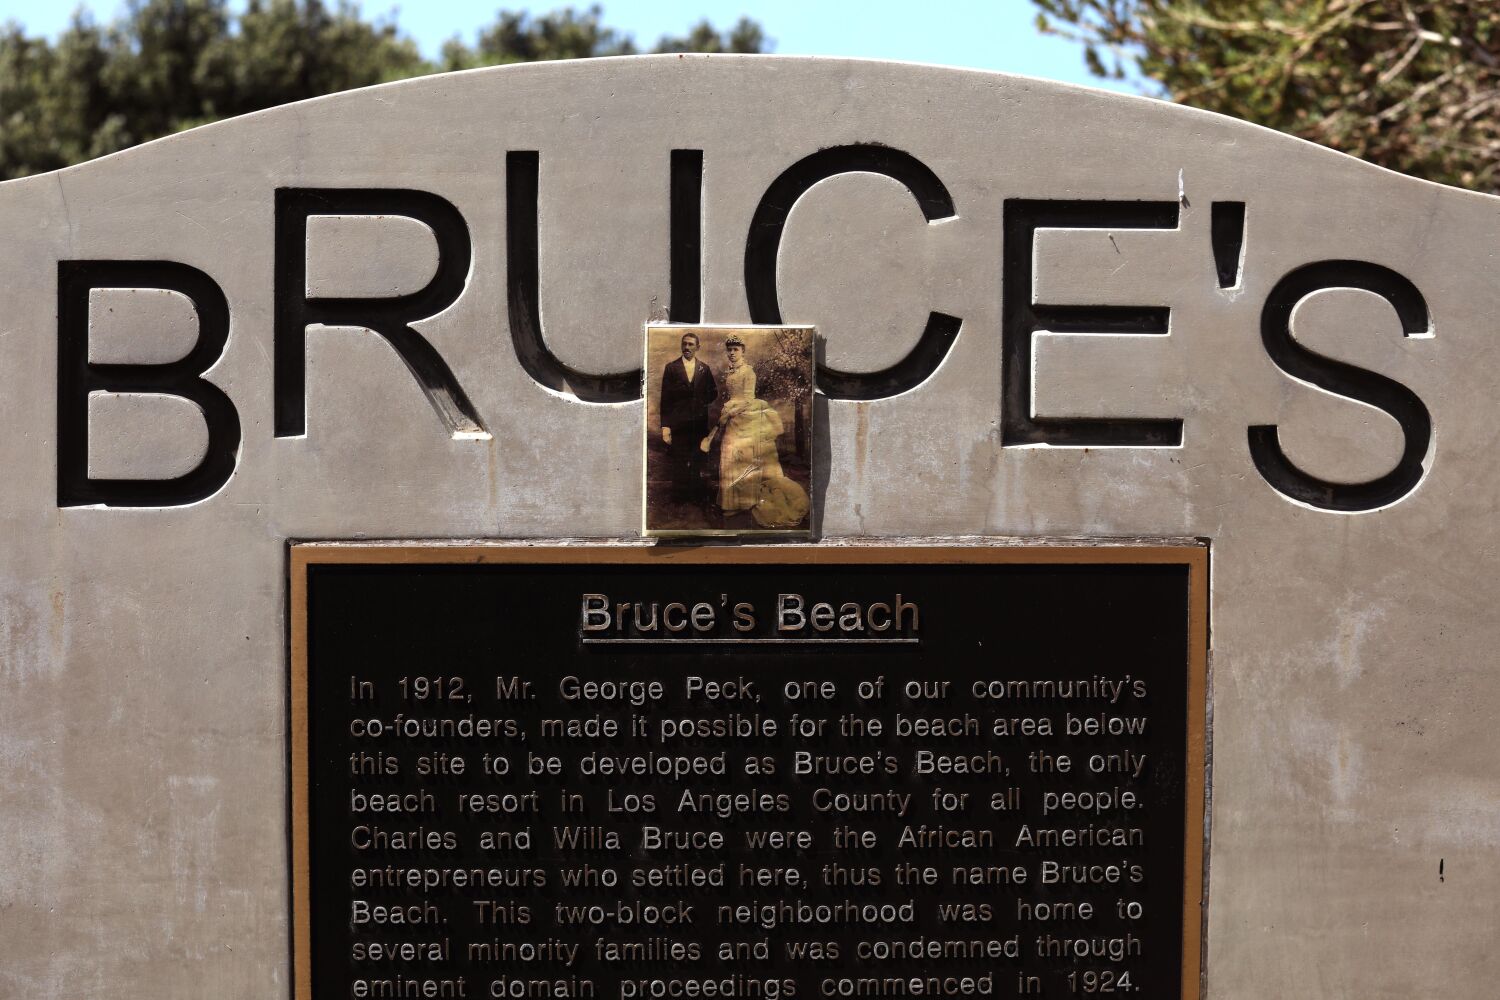 Family to sell Bruce's Beach property back to L.A. County